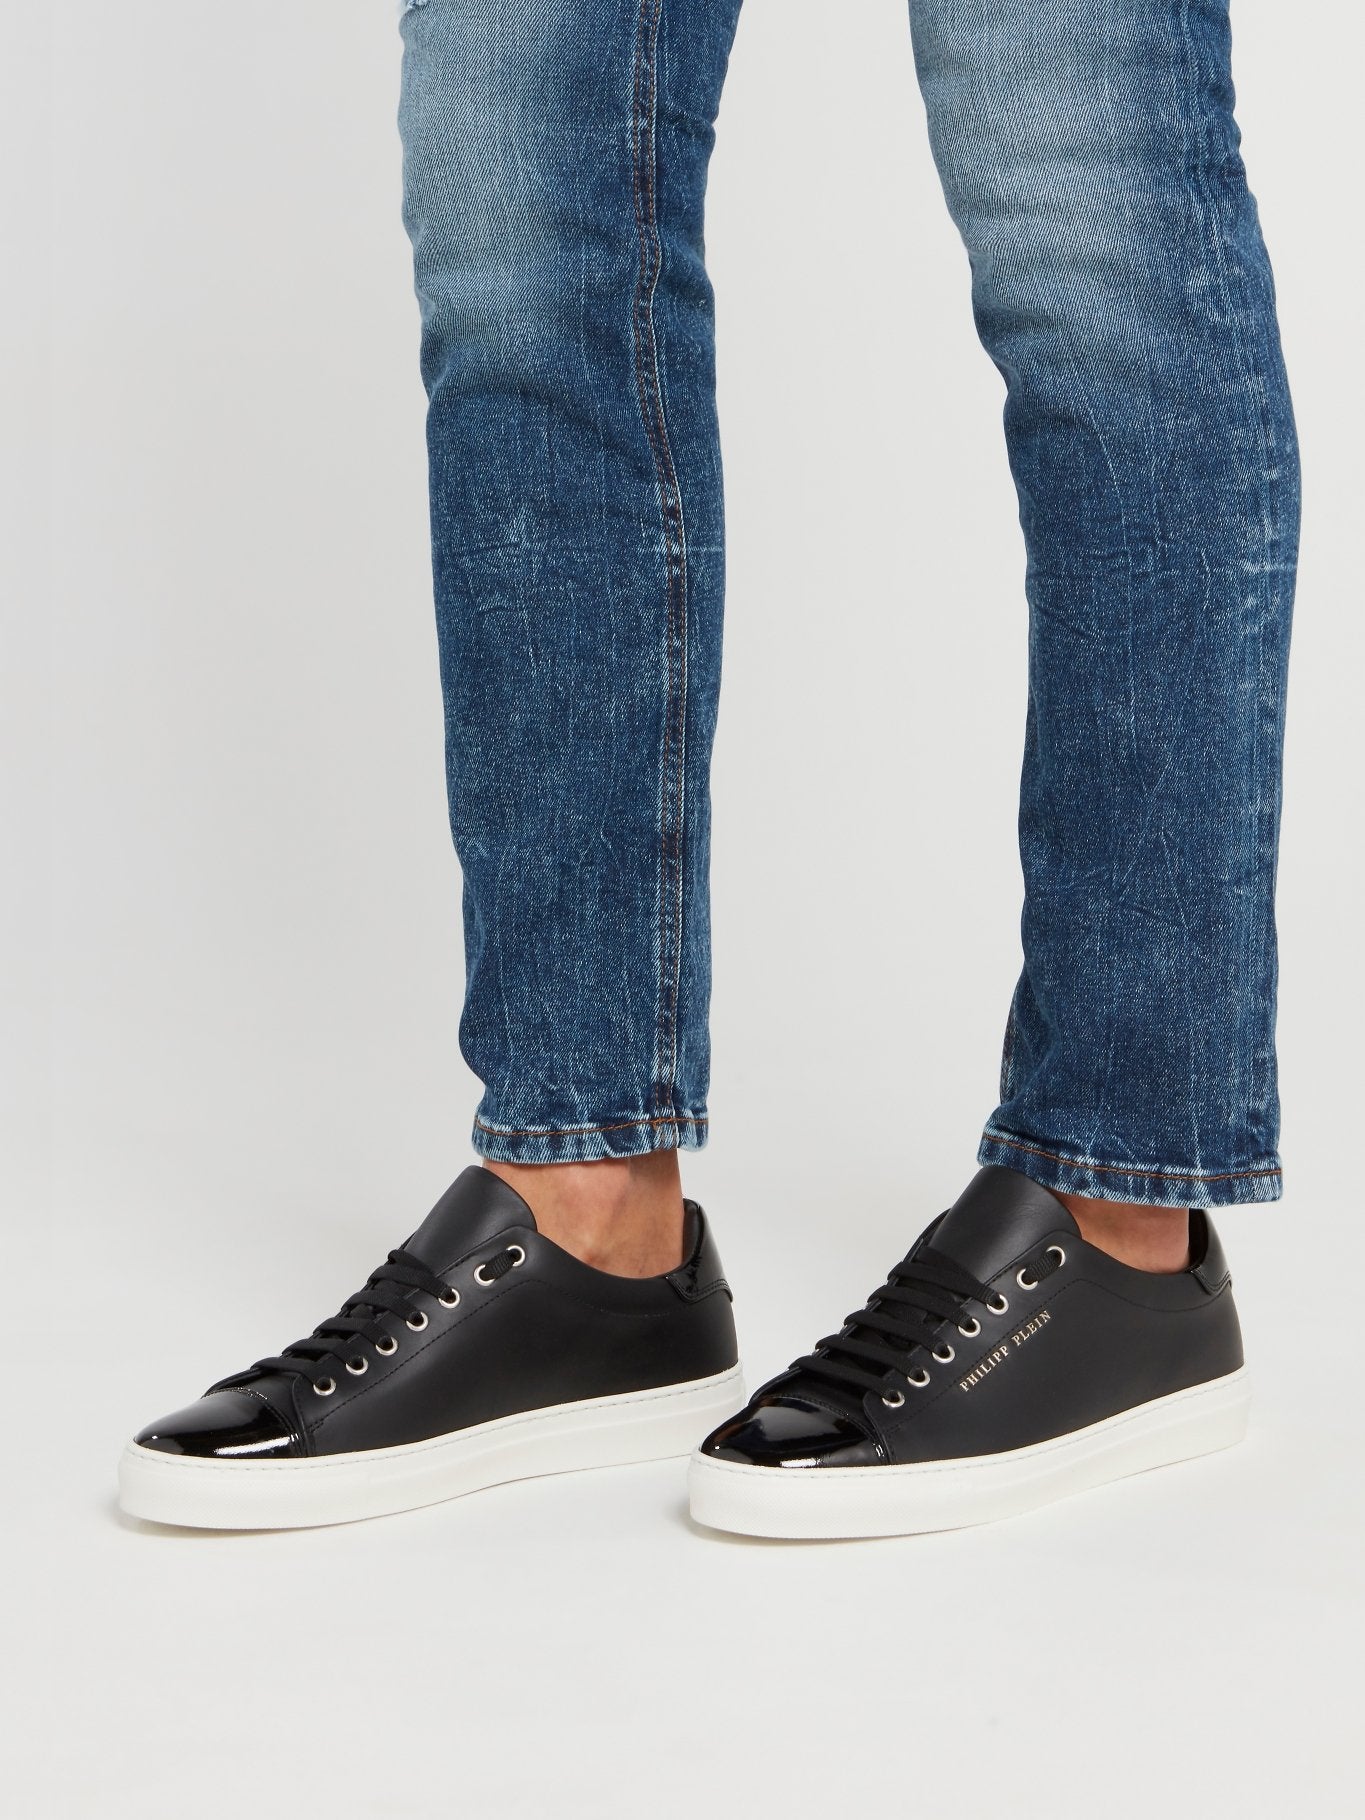 Black Patent Leather Heel and Toe Patch Sneakers